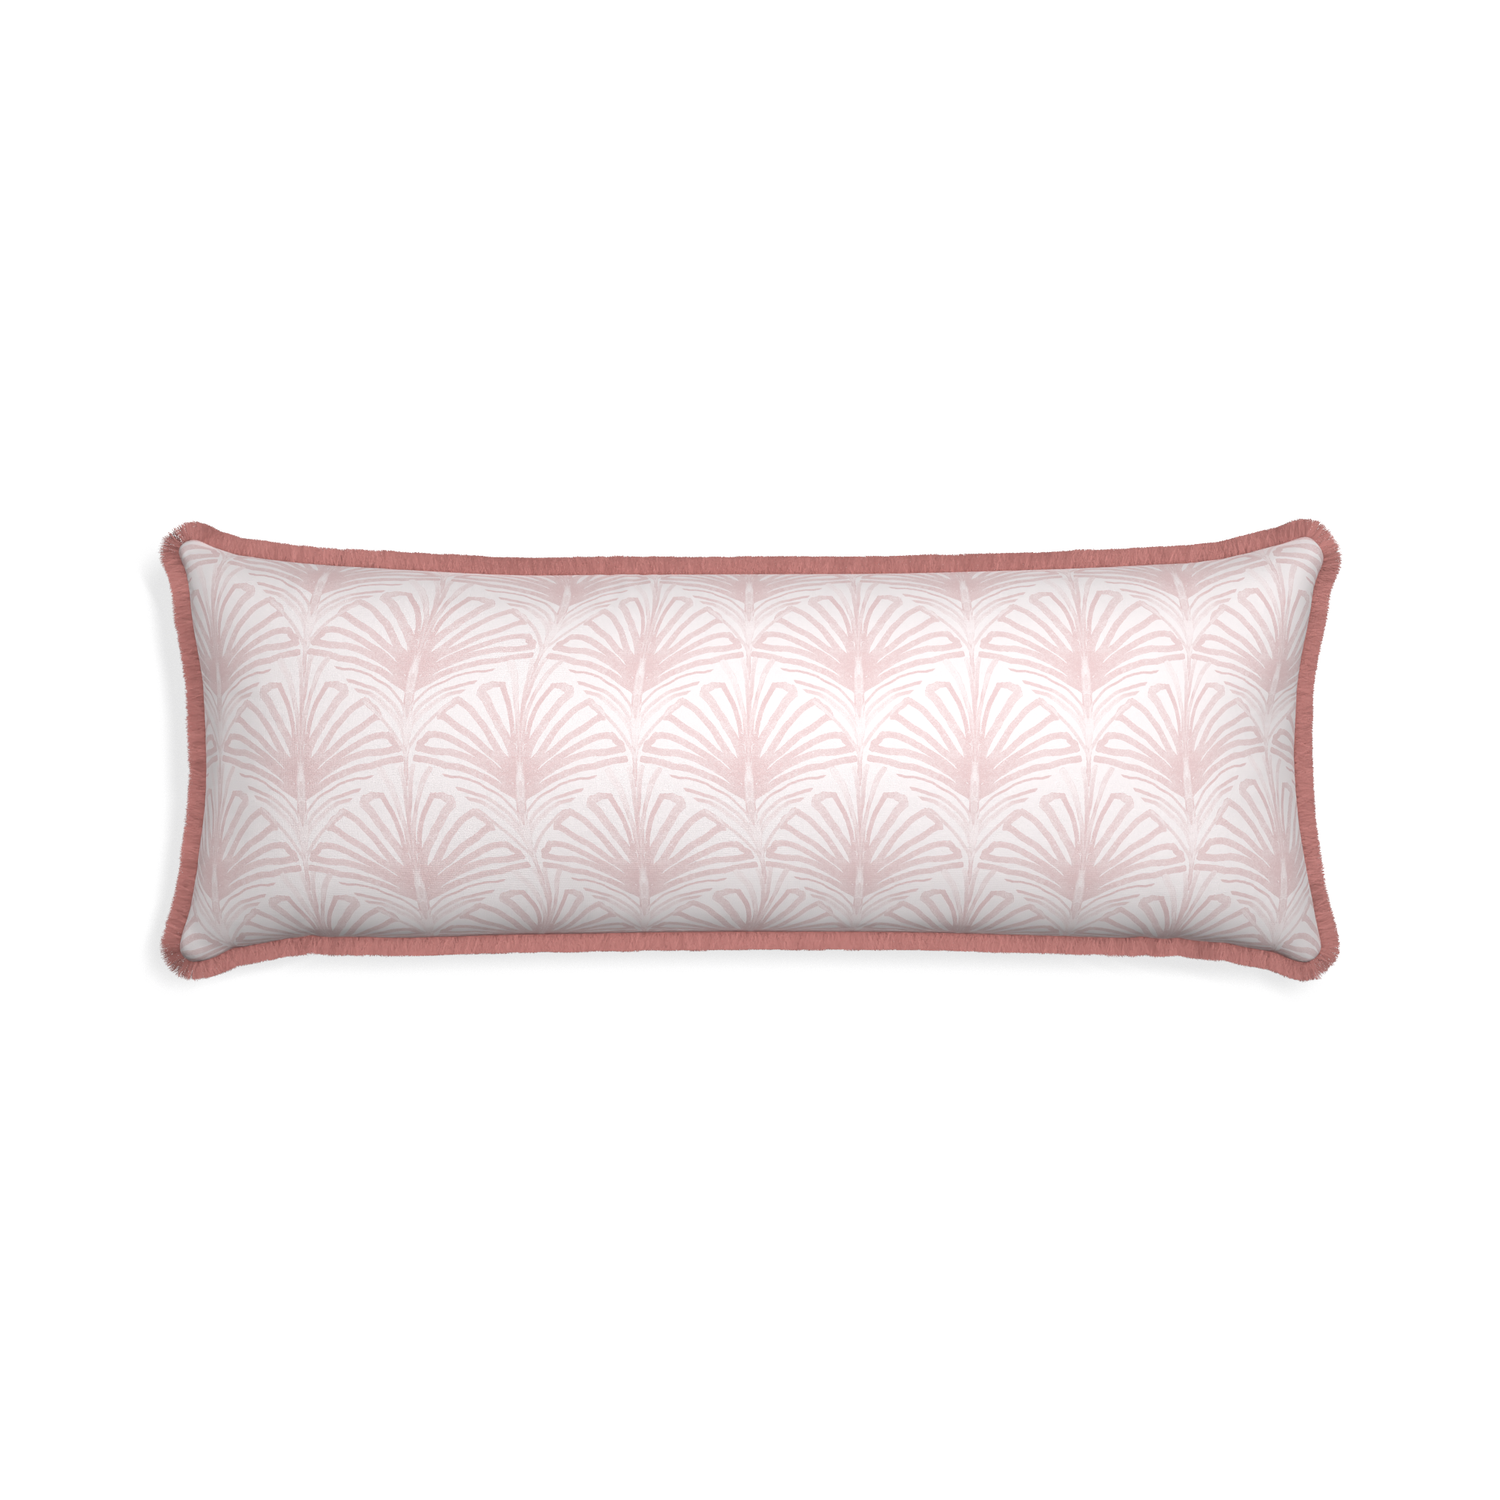 Xl-lumbar suzy rose custom pillow with d fringe on white background